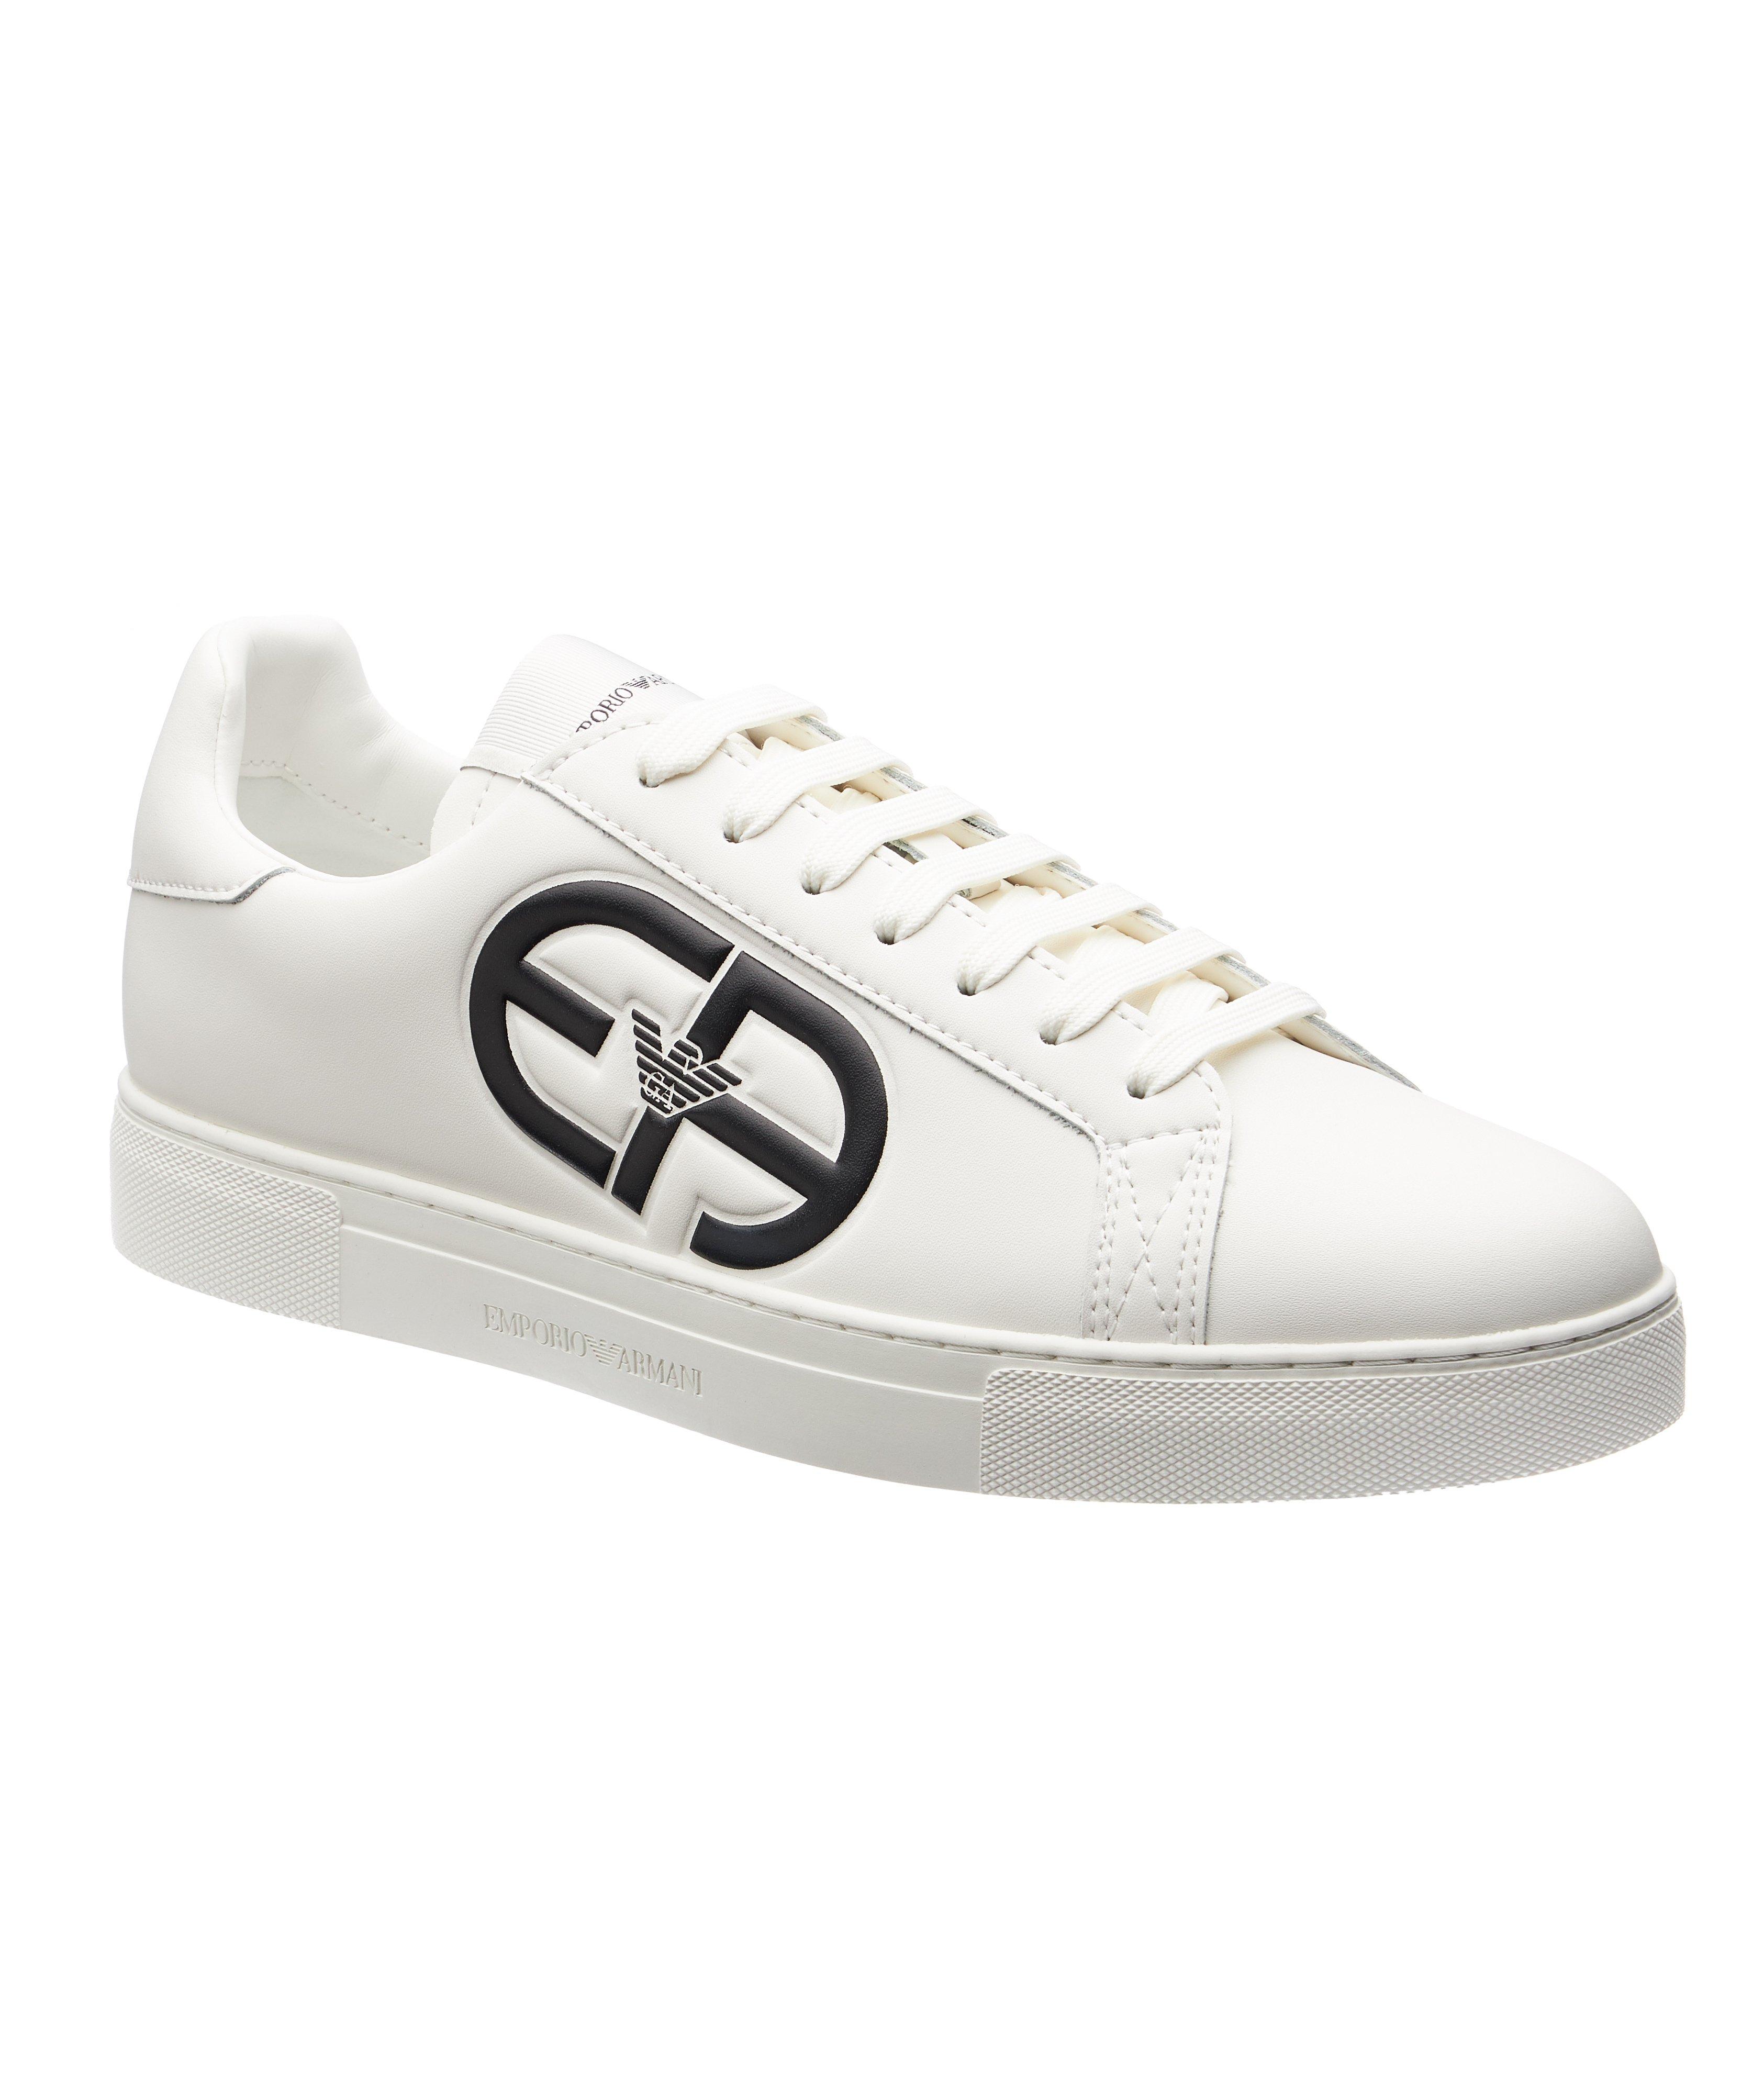 Logo Leather Sneakers image 0